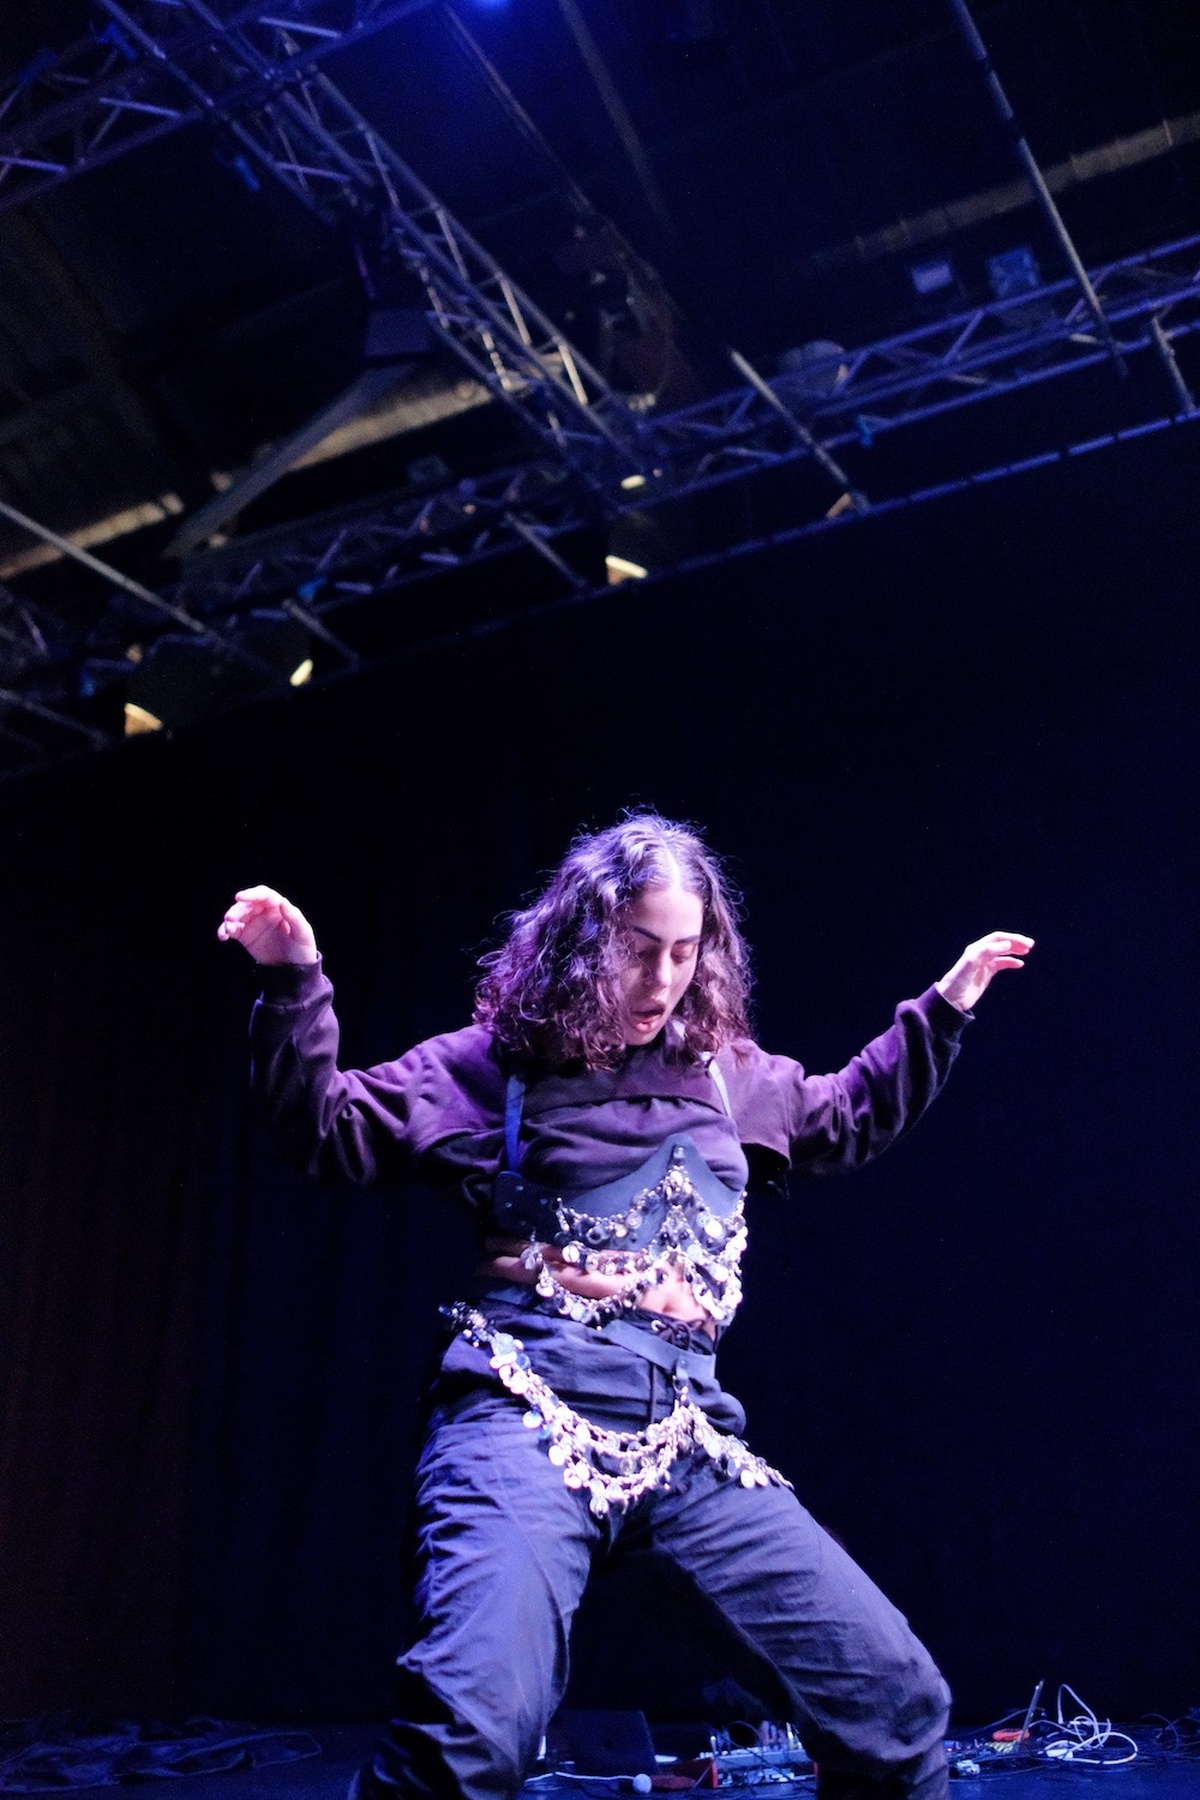 A person is performing within a dark theatrical space, they look down at the ground and holding their arms up mid-dance.